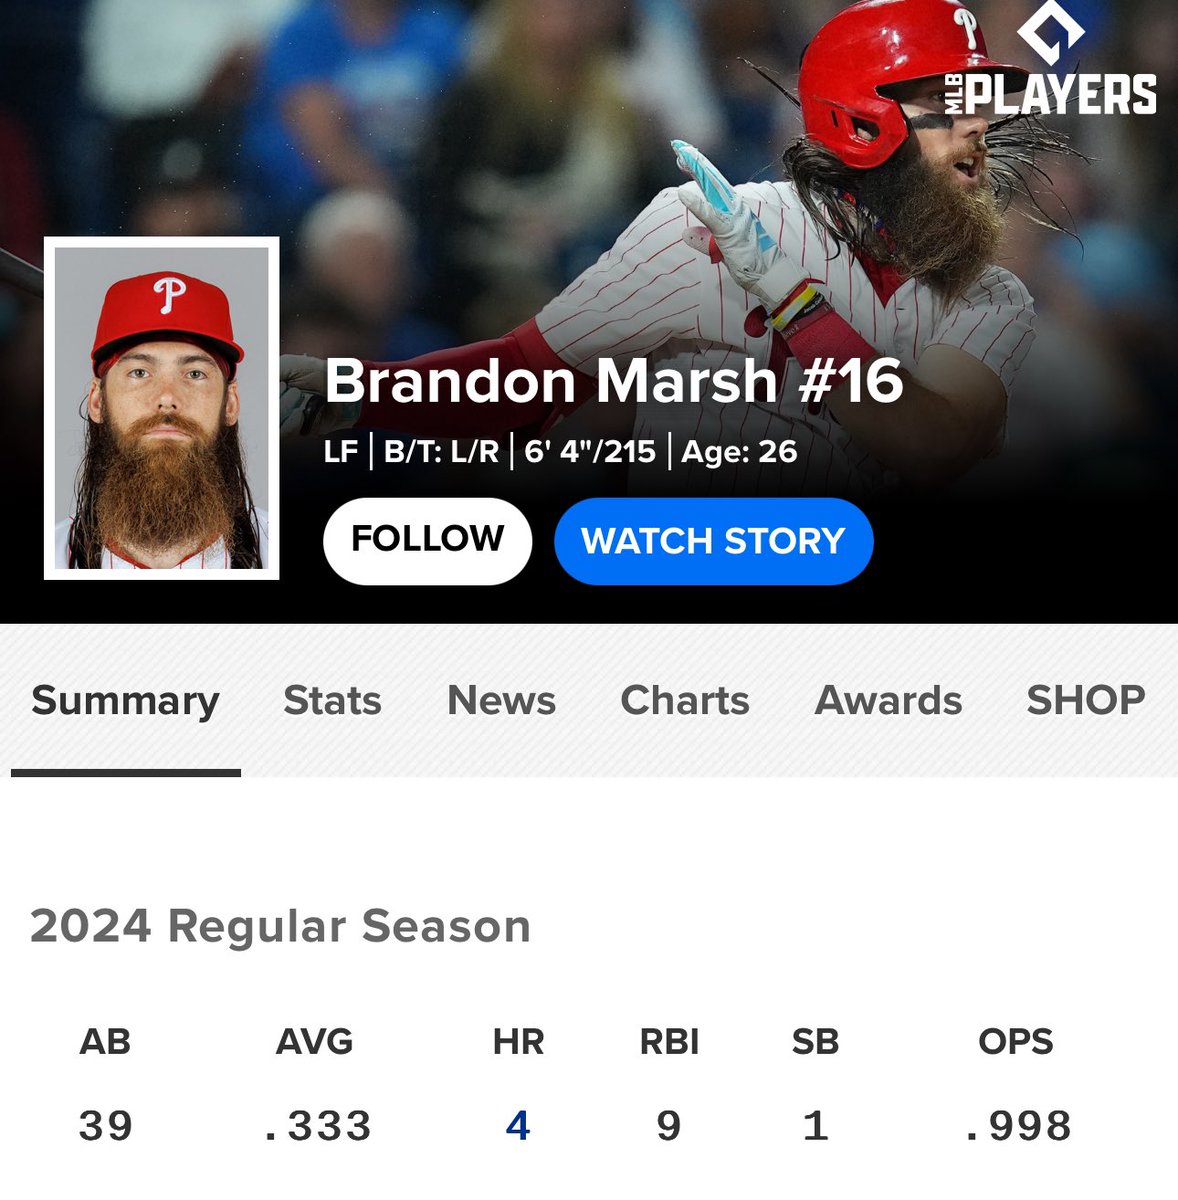 Phillies Marsh is an absolute stud